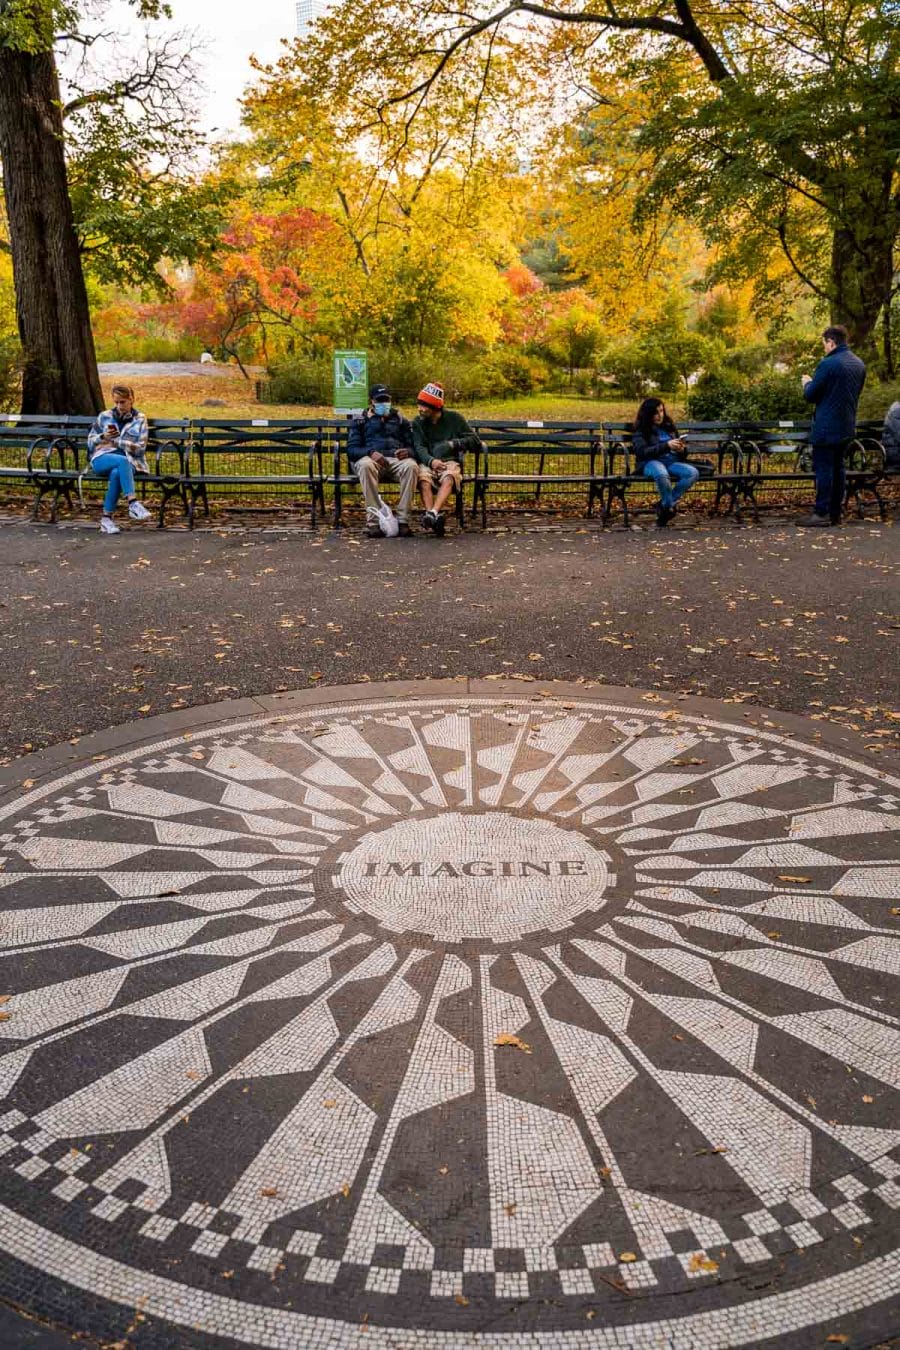 Strawberry Fields in Central Park, New York